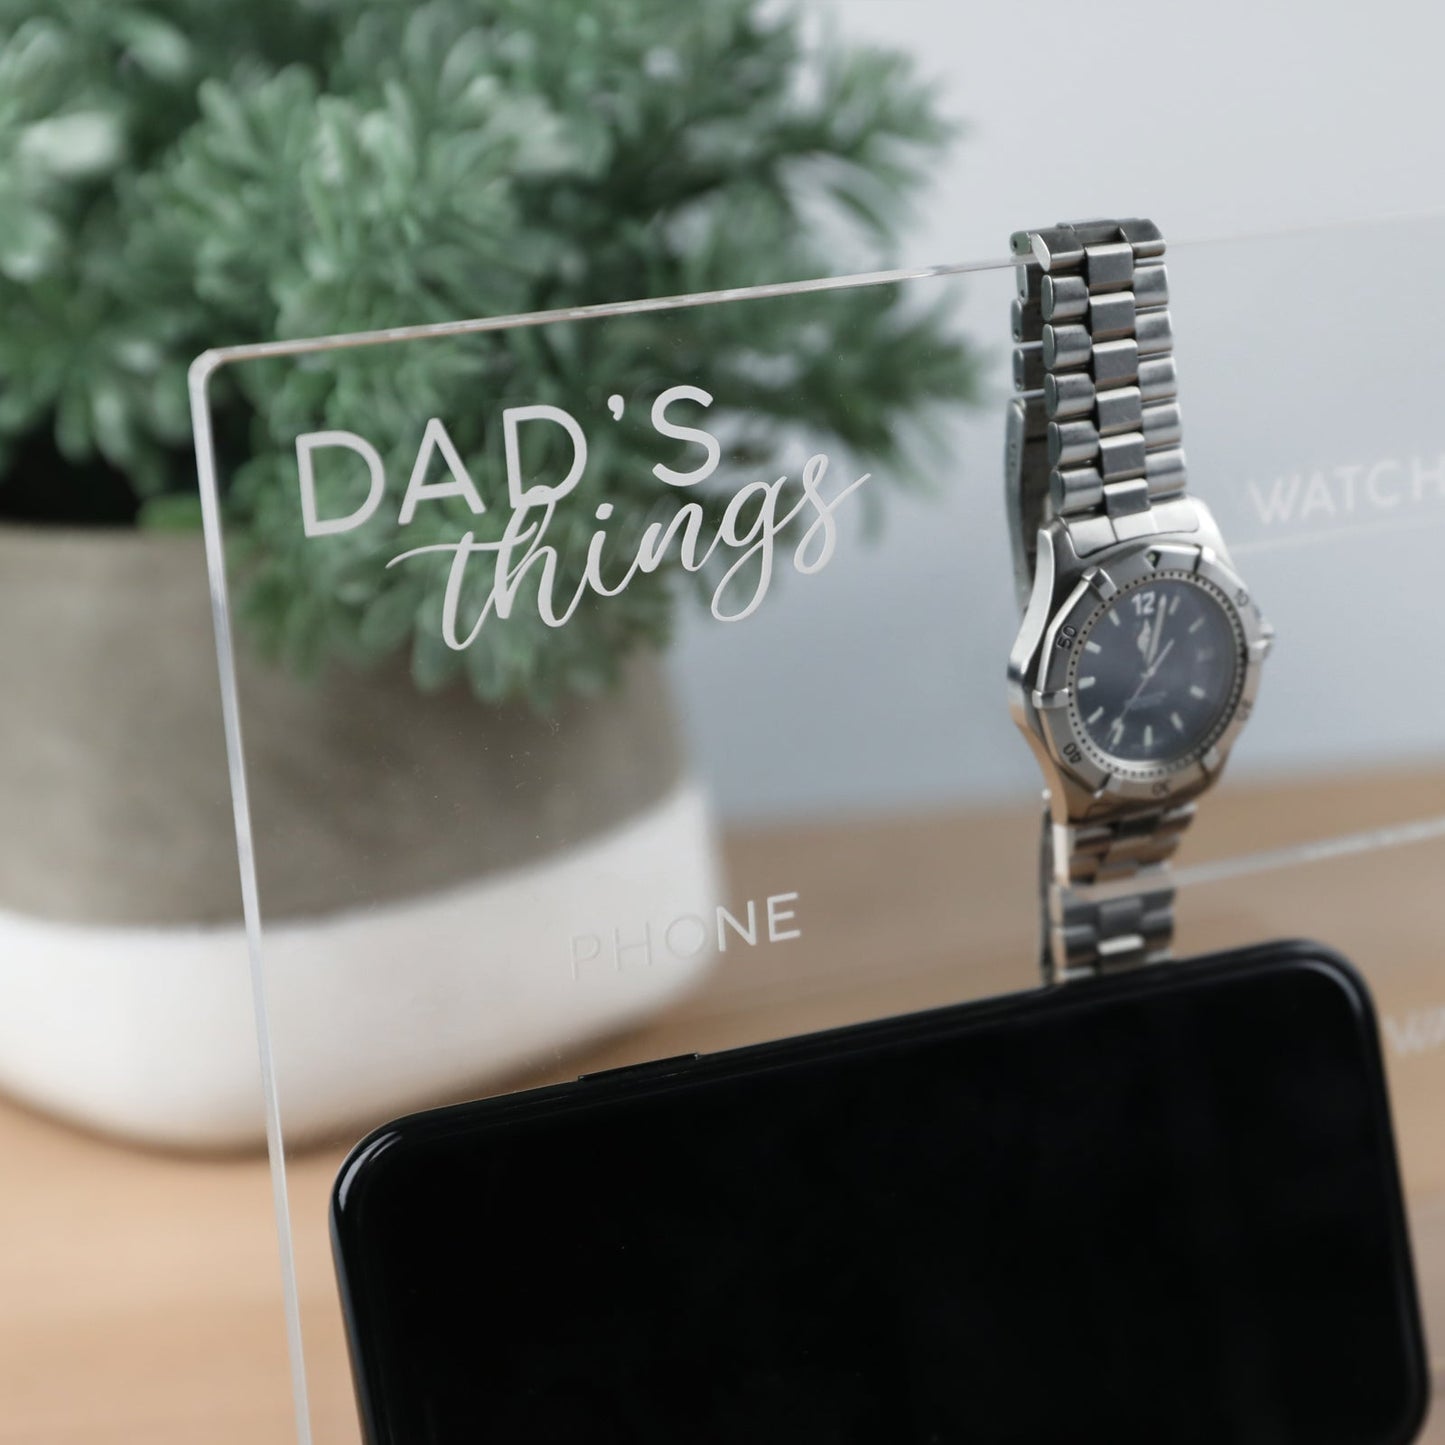 Desk Organiser Personalised for Dad this Father's Day